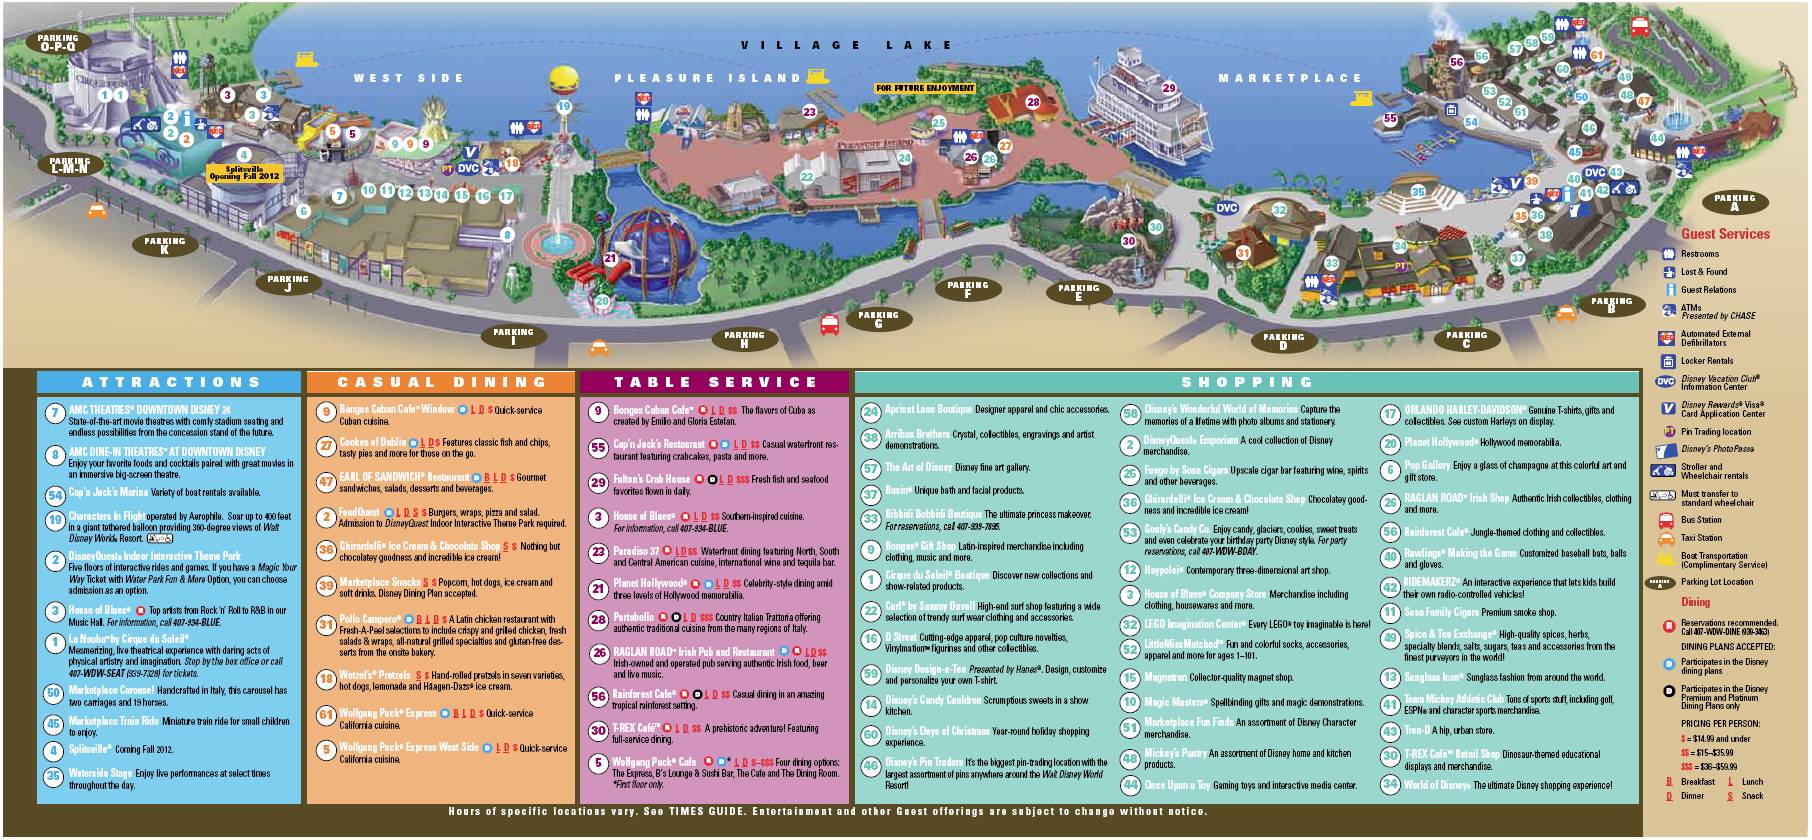 PHOTO - New format for Downtown Disney guidemap including all the latest changes